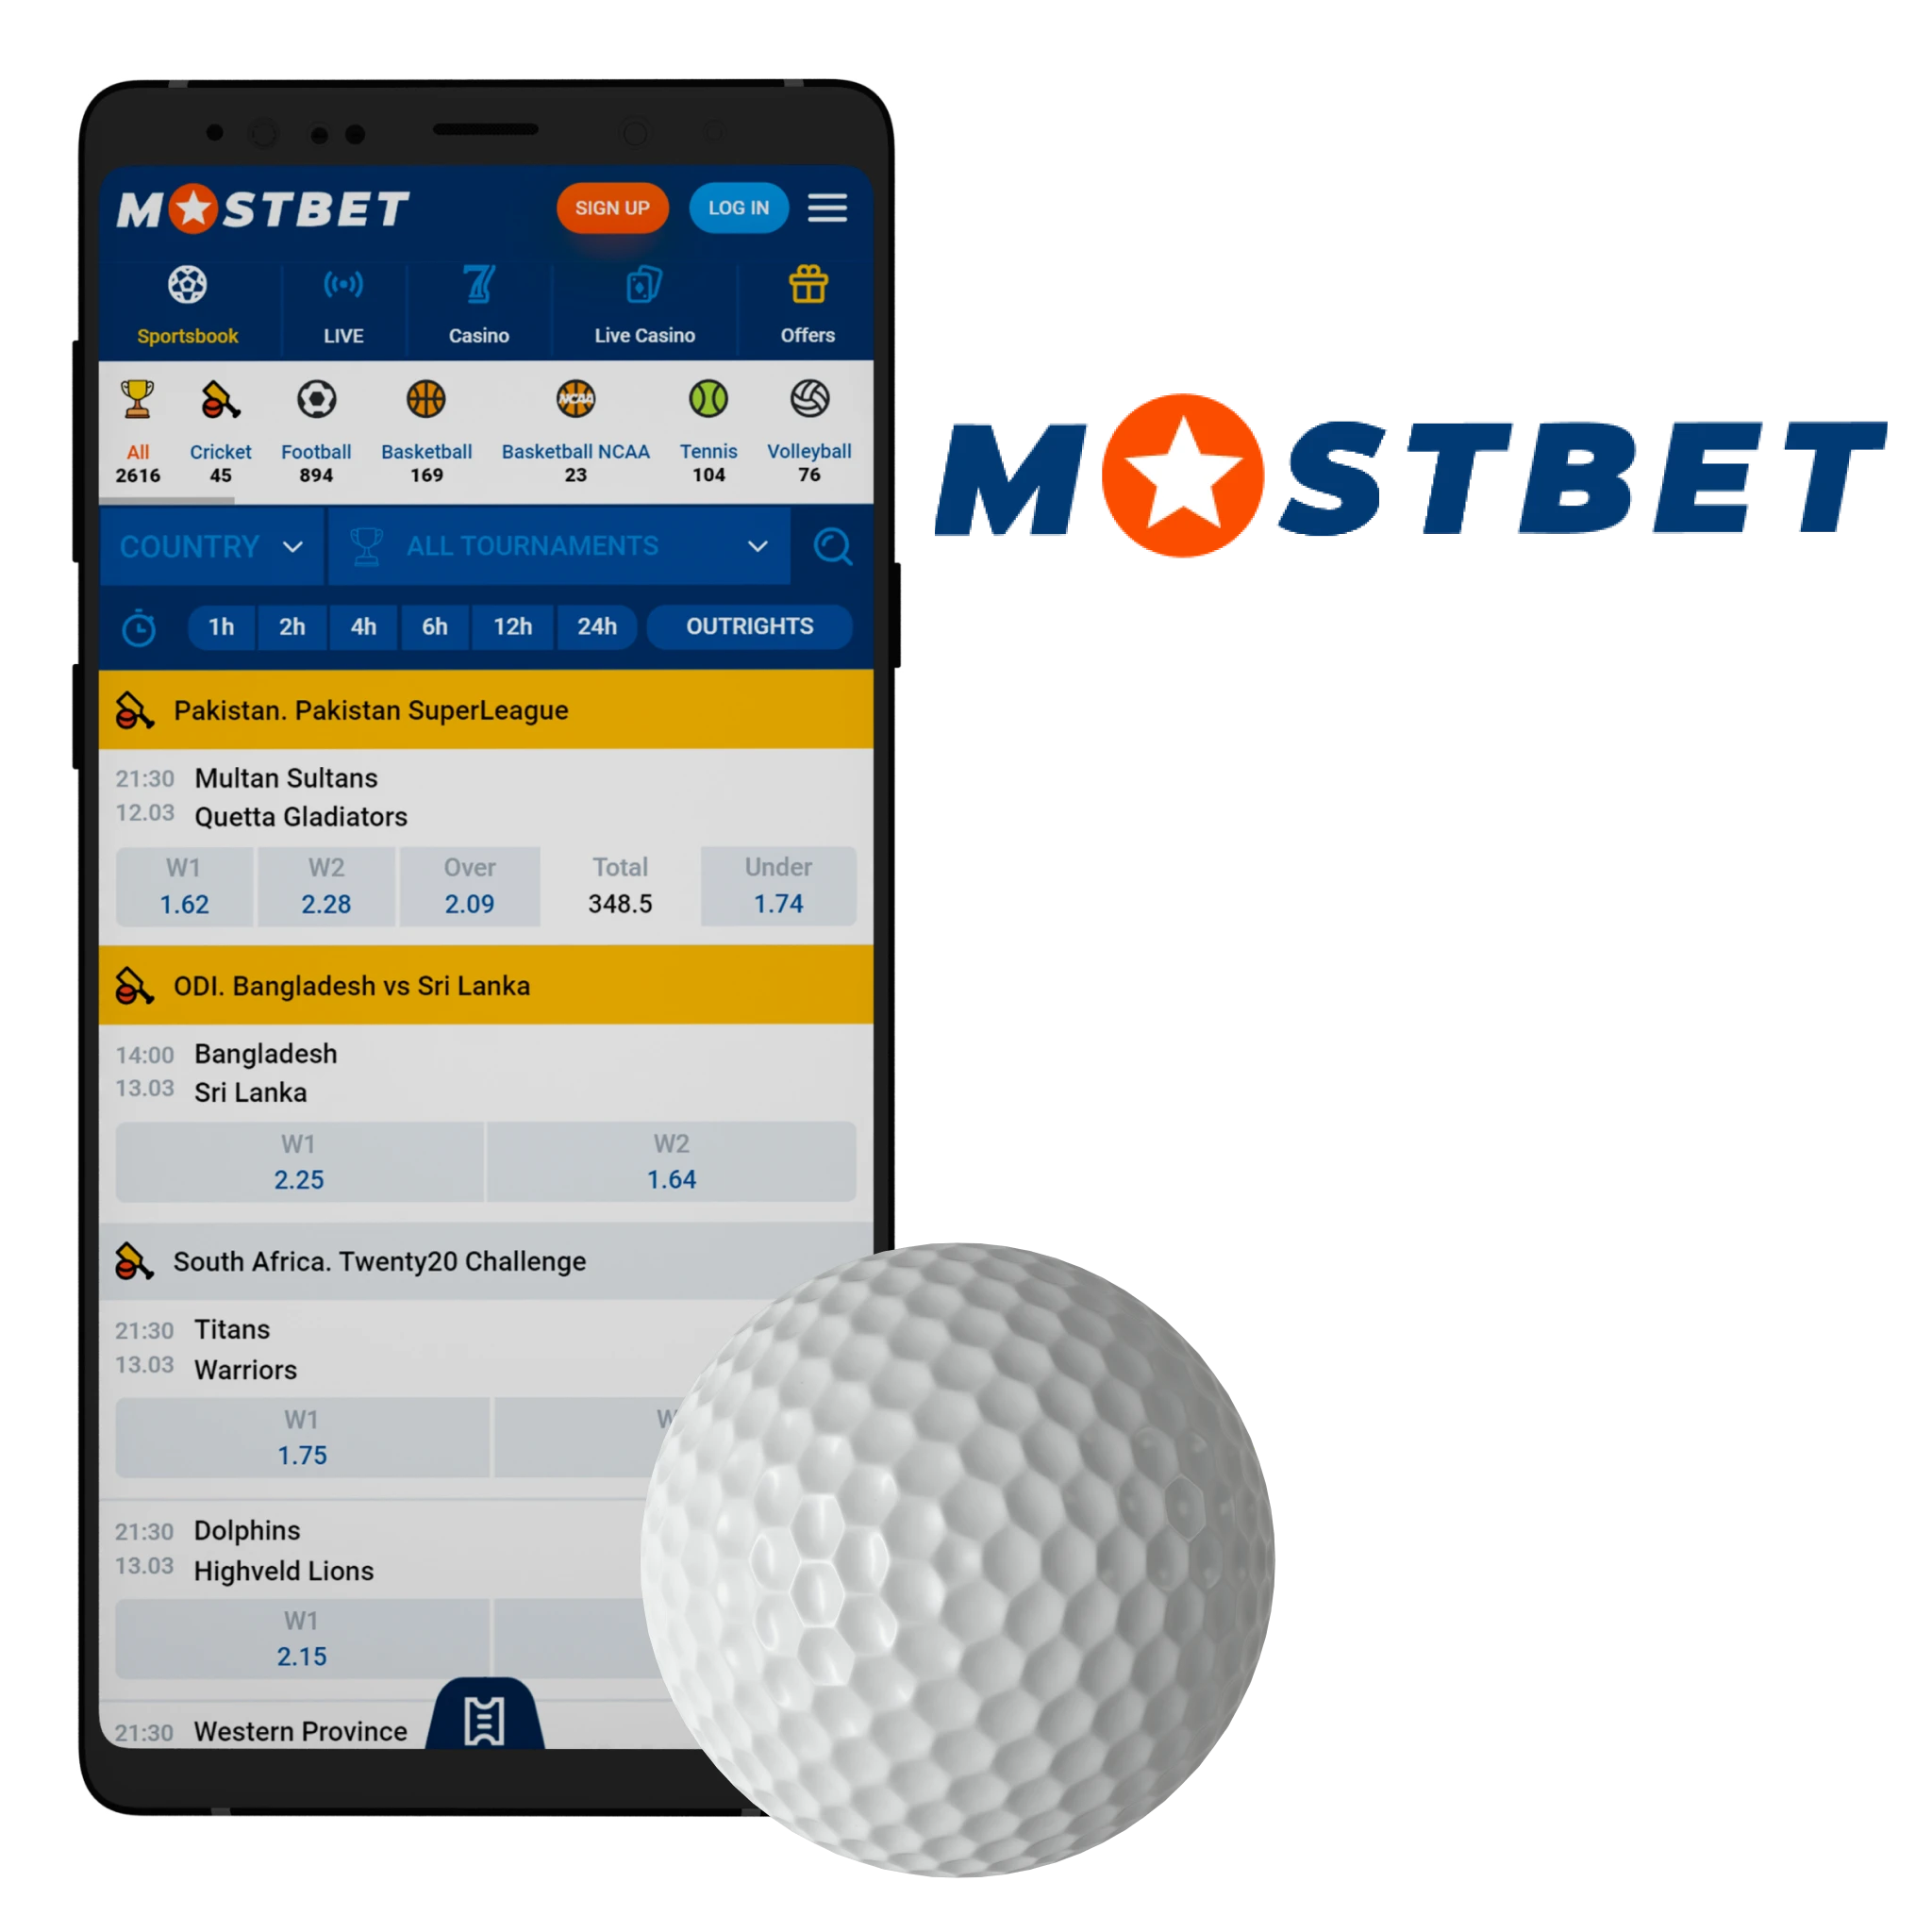 The Mostbet app has key advantages for golf betting.